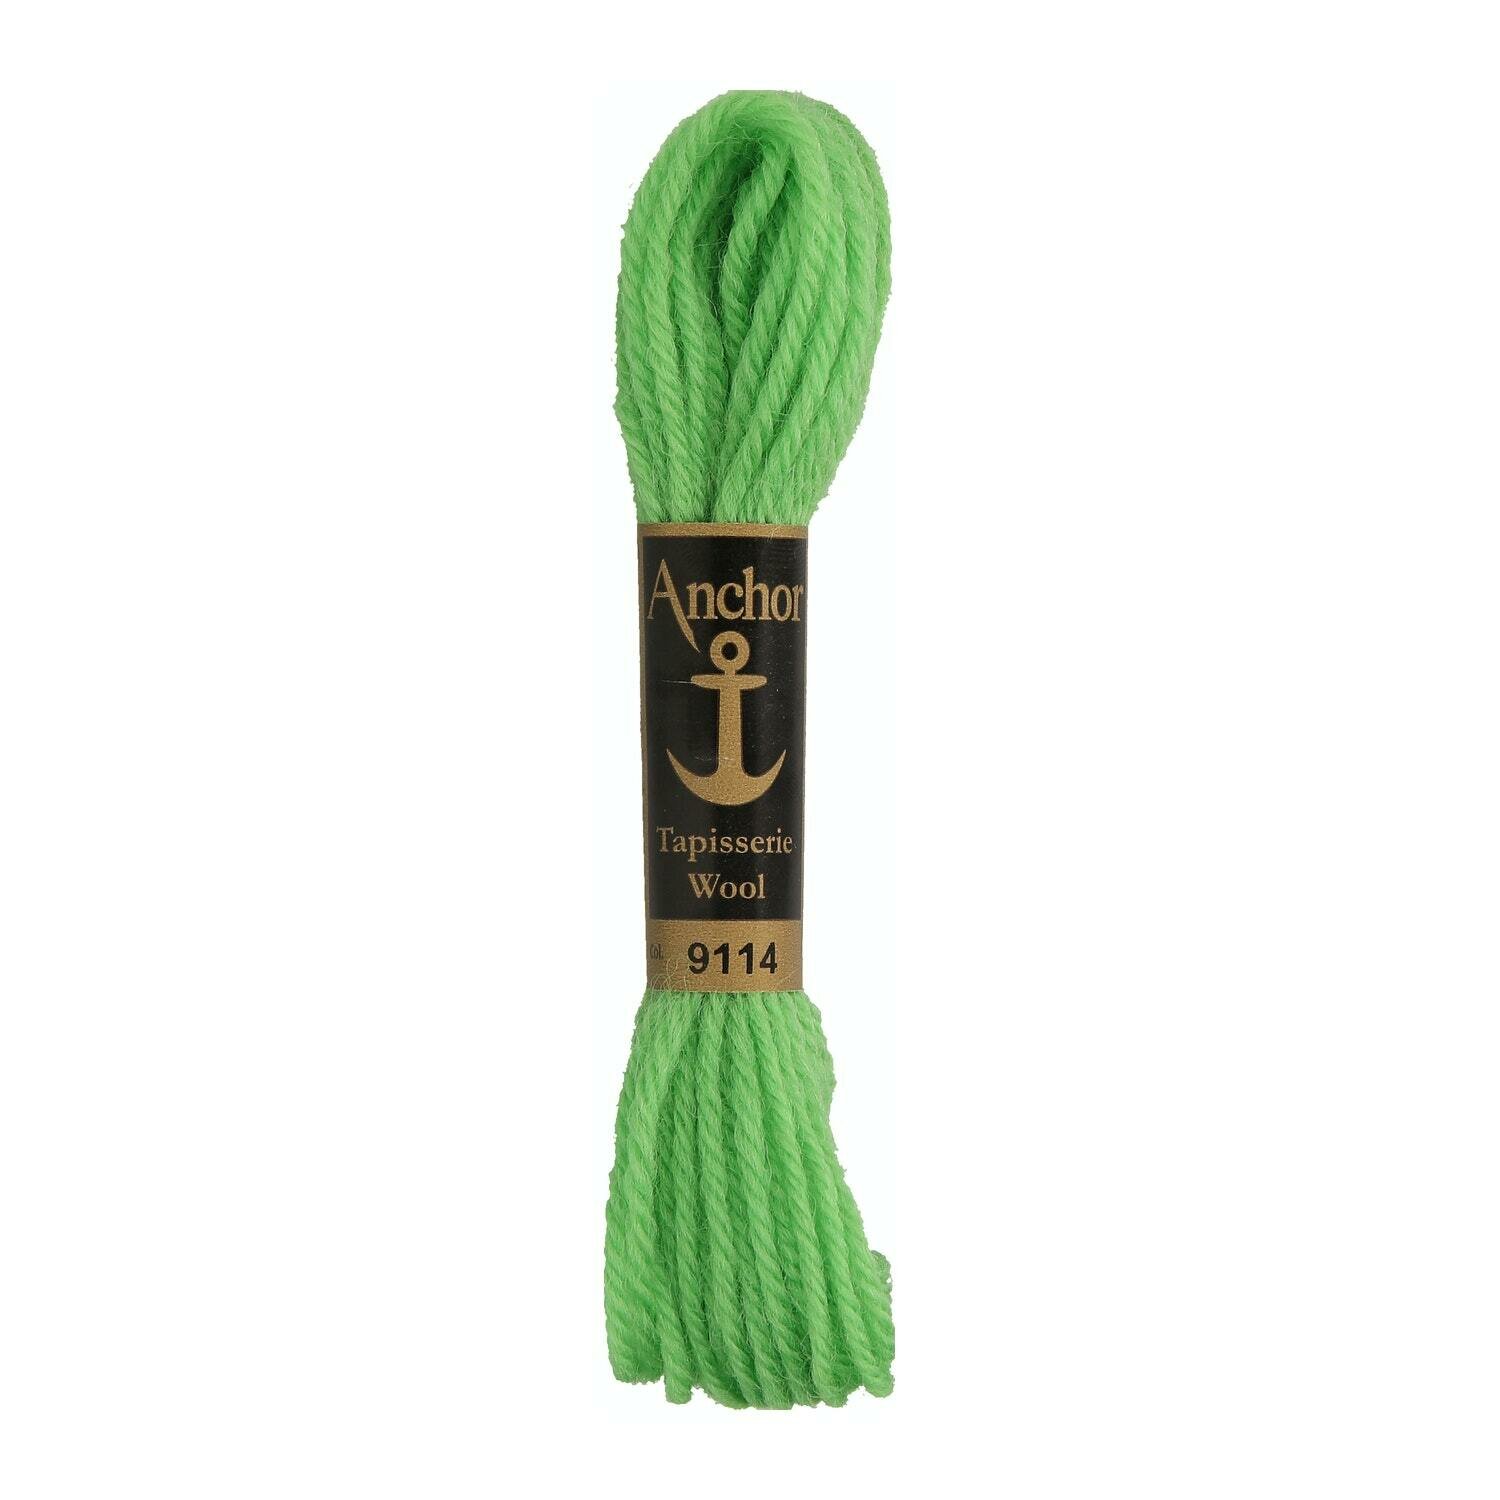 Anchor Tapisserie Wool # 09114